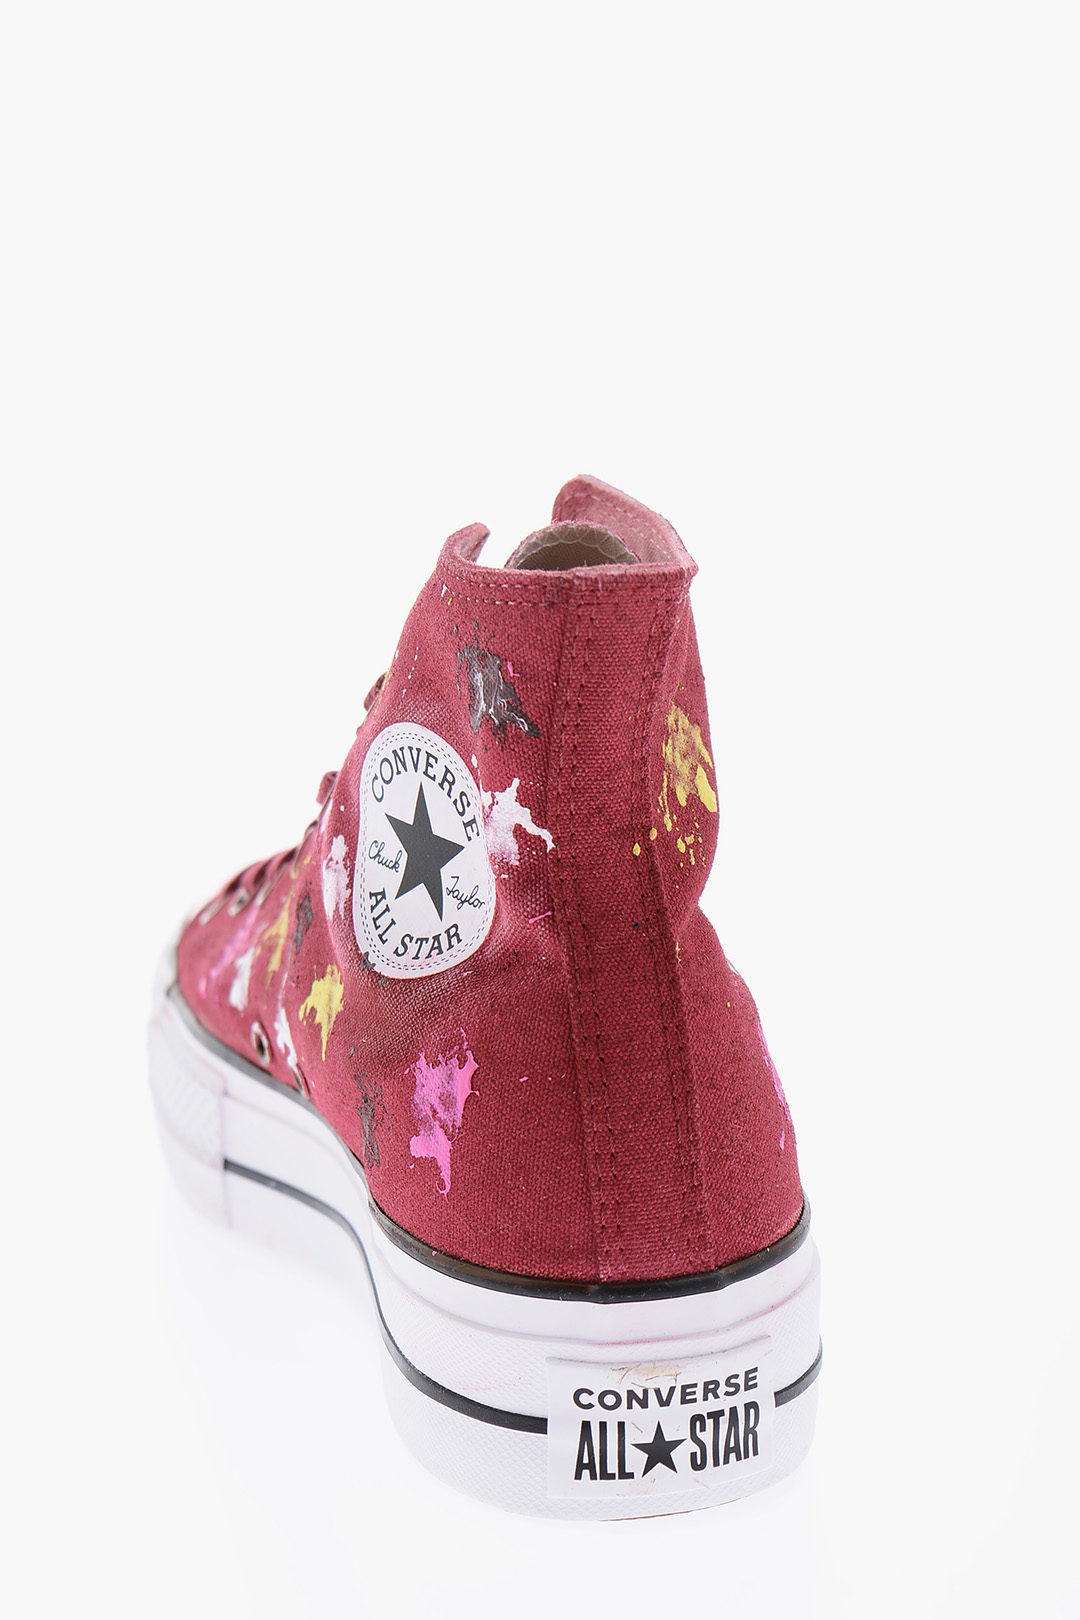 See by Monogram Denim Sneakers with Maxi Laces Size 37